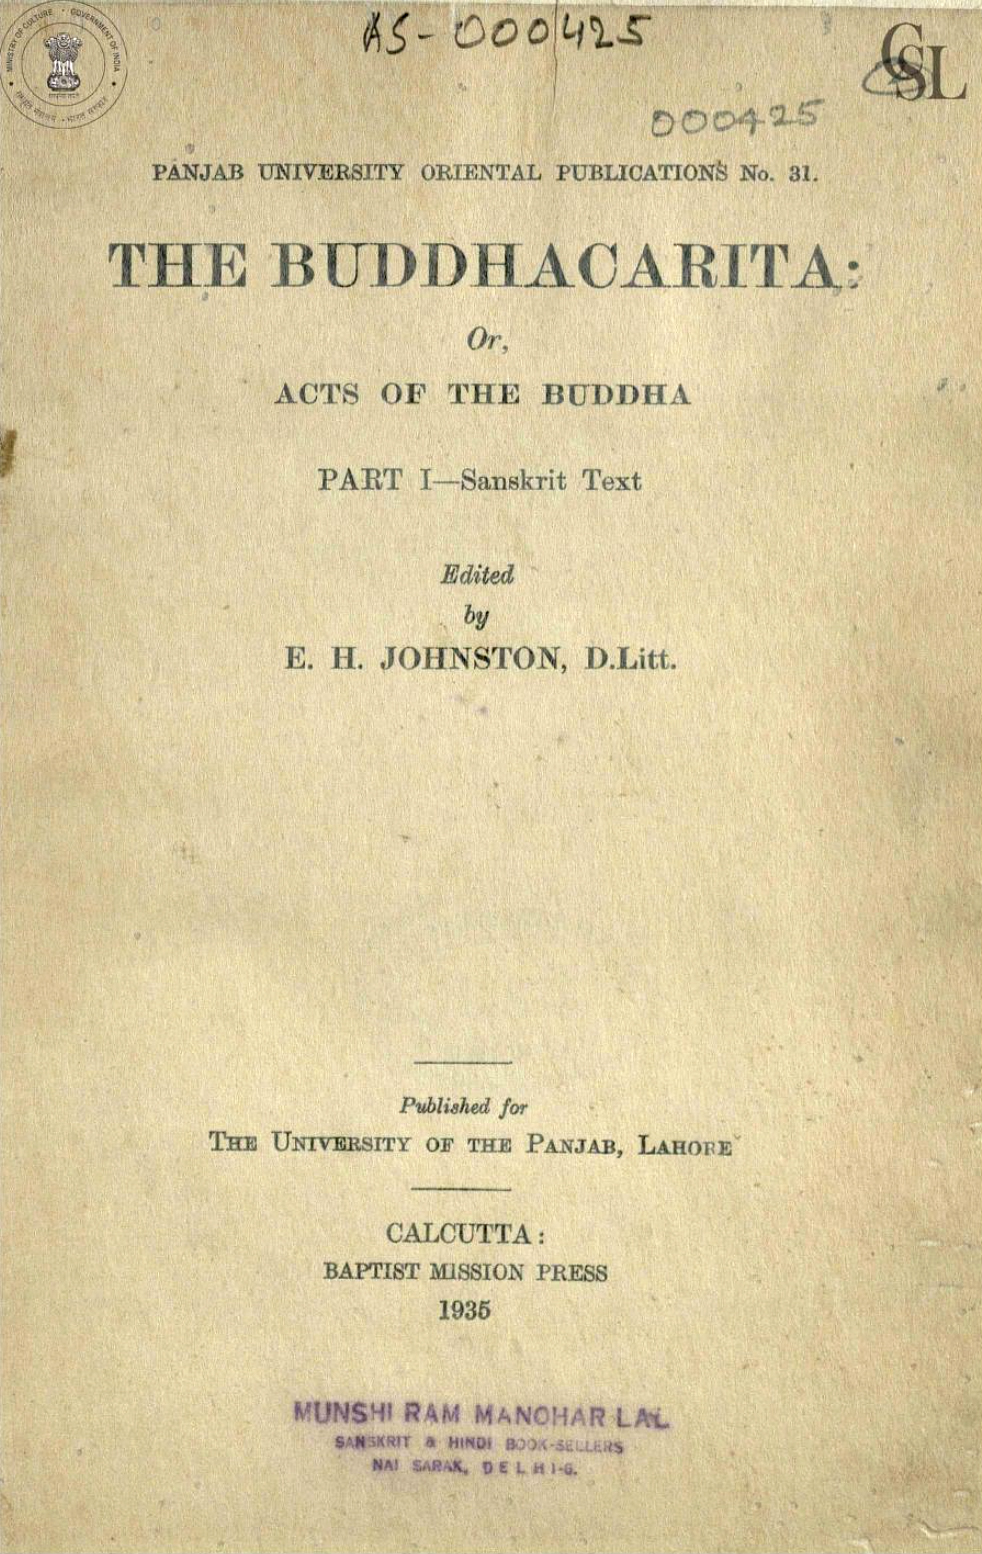 The Buddhacarita or Acts of the Buddha Vol 1 Sanskrit Text 1935-front.jpg